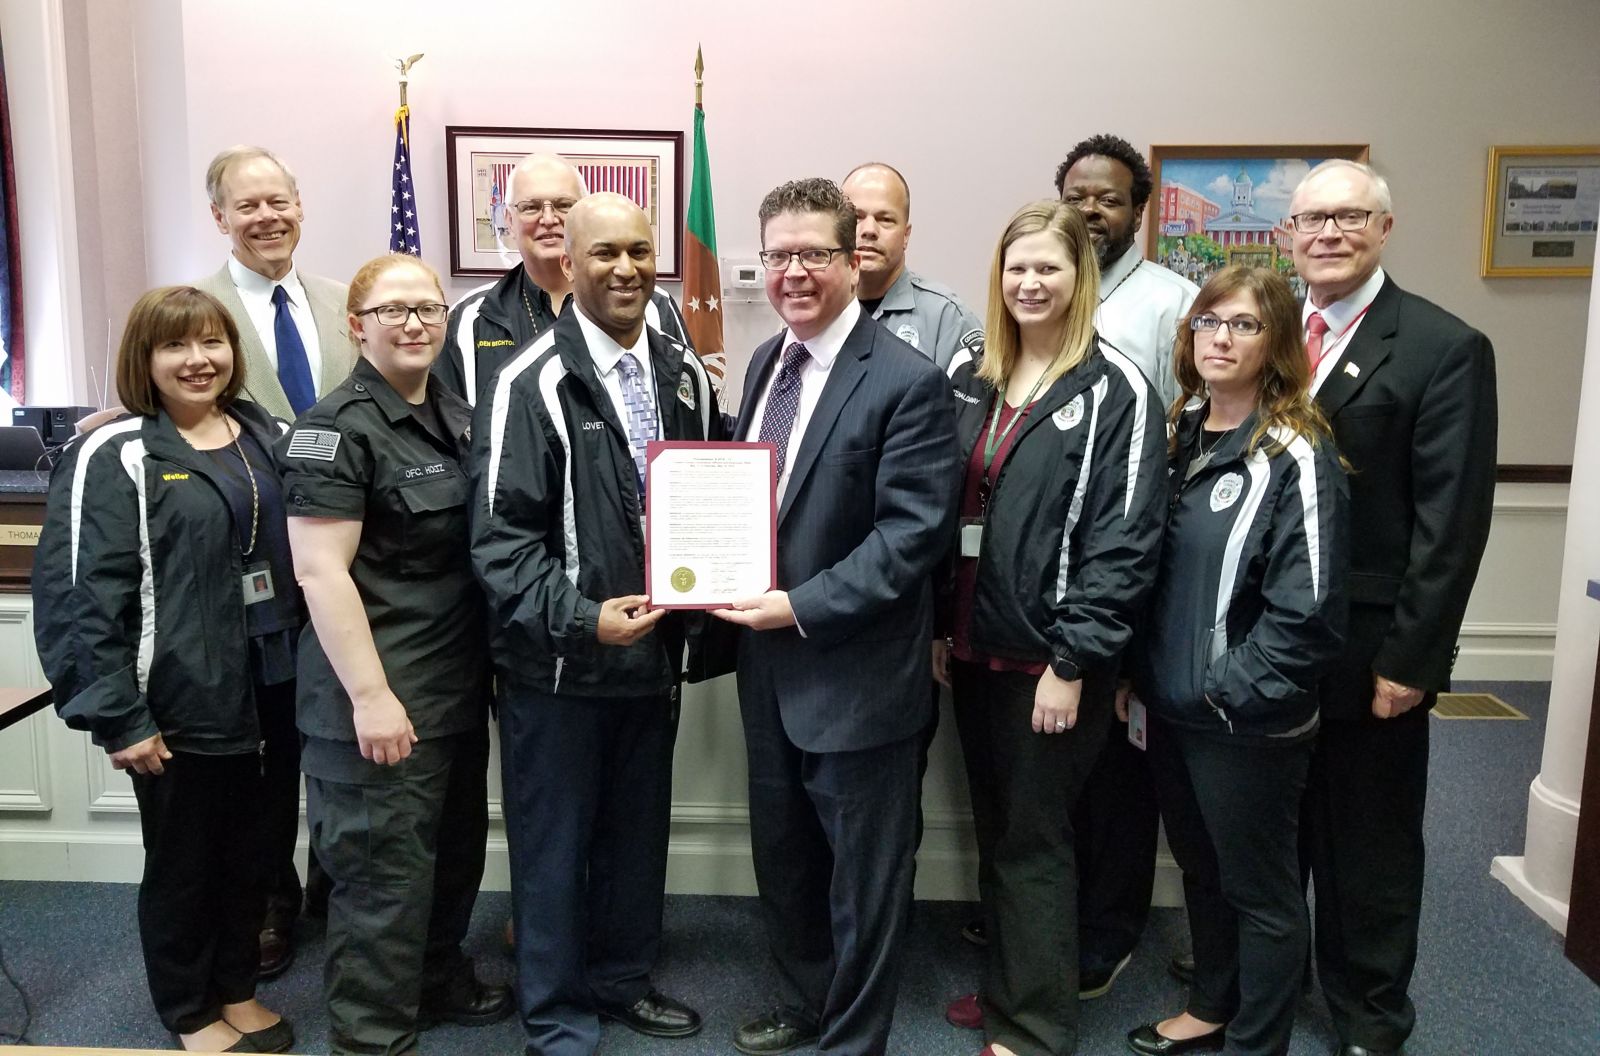 Proclamation declaring the week of May 13-19 as Correctional Officers and Employees Week in Franklin County. Pictured above: (back row from left) Commissioner Bob Ziobrowski, Warden Bill Bechtold, Correctional Officer Robert Fink, Deputy Warden James Sullen, Commissioner Bob Thomas; (front row from left) Deputy Warden Michelle Weller, Correctional Officer Sara Holtz, Records Specialist Lamont Lovett, Commissioner Chairman Dave Keller, Correctional Treatment Specialist Danielle Haldaway, and Correctional Treatment Specialist Deanna Park